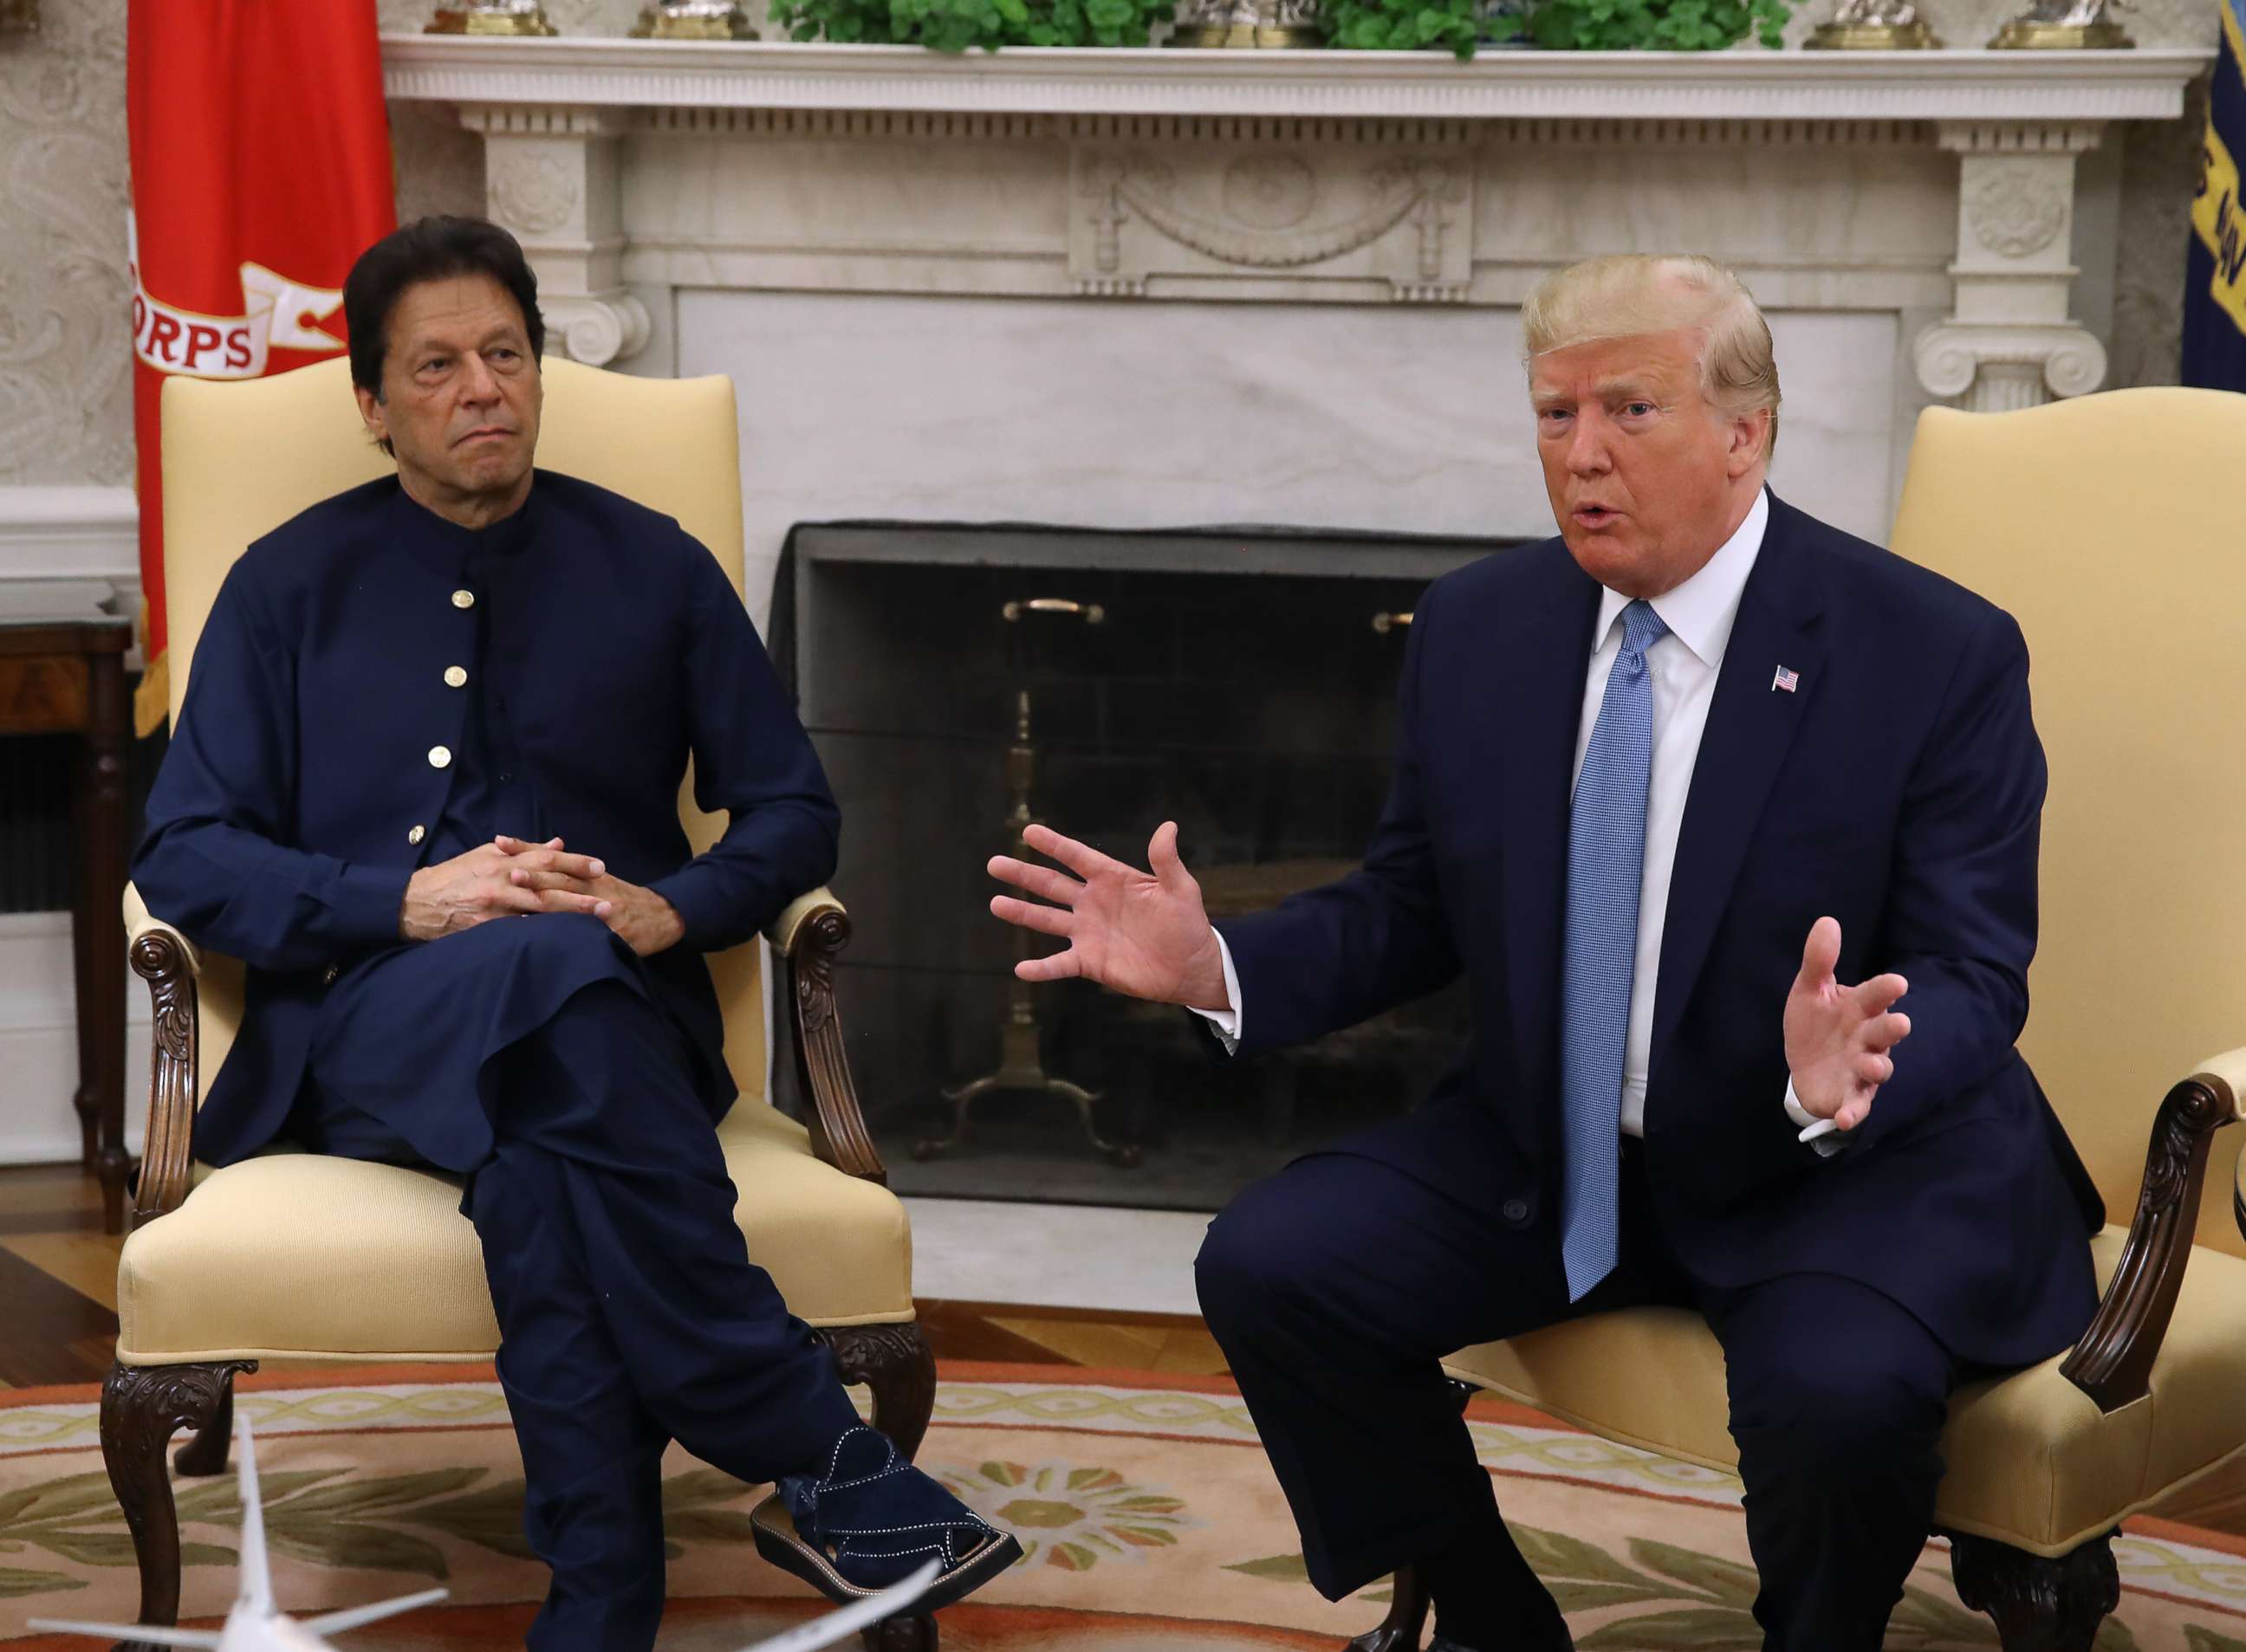 PHOTO: U.S. President Donald Trump meets with Prime Minister of the Islamic Republic of Pakistan, Imran Khan in the Oval Office at the White House on July 22, 2019 in Washington.